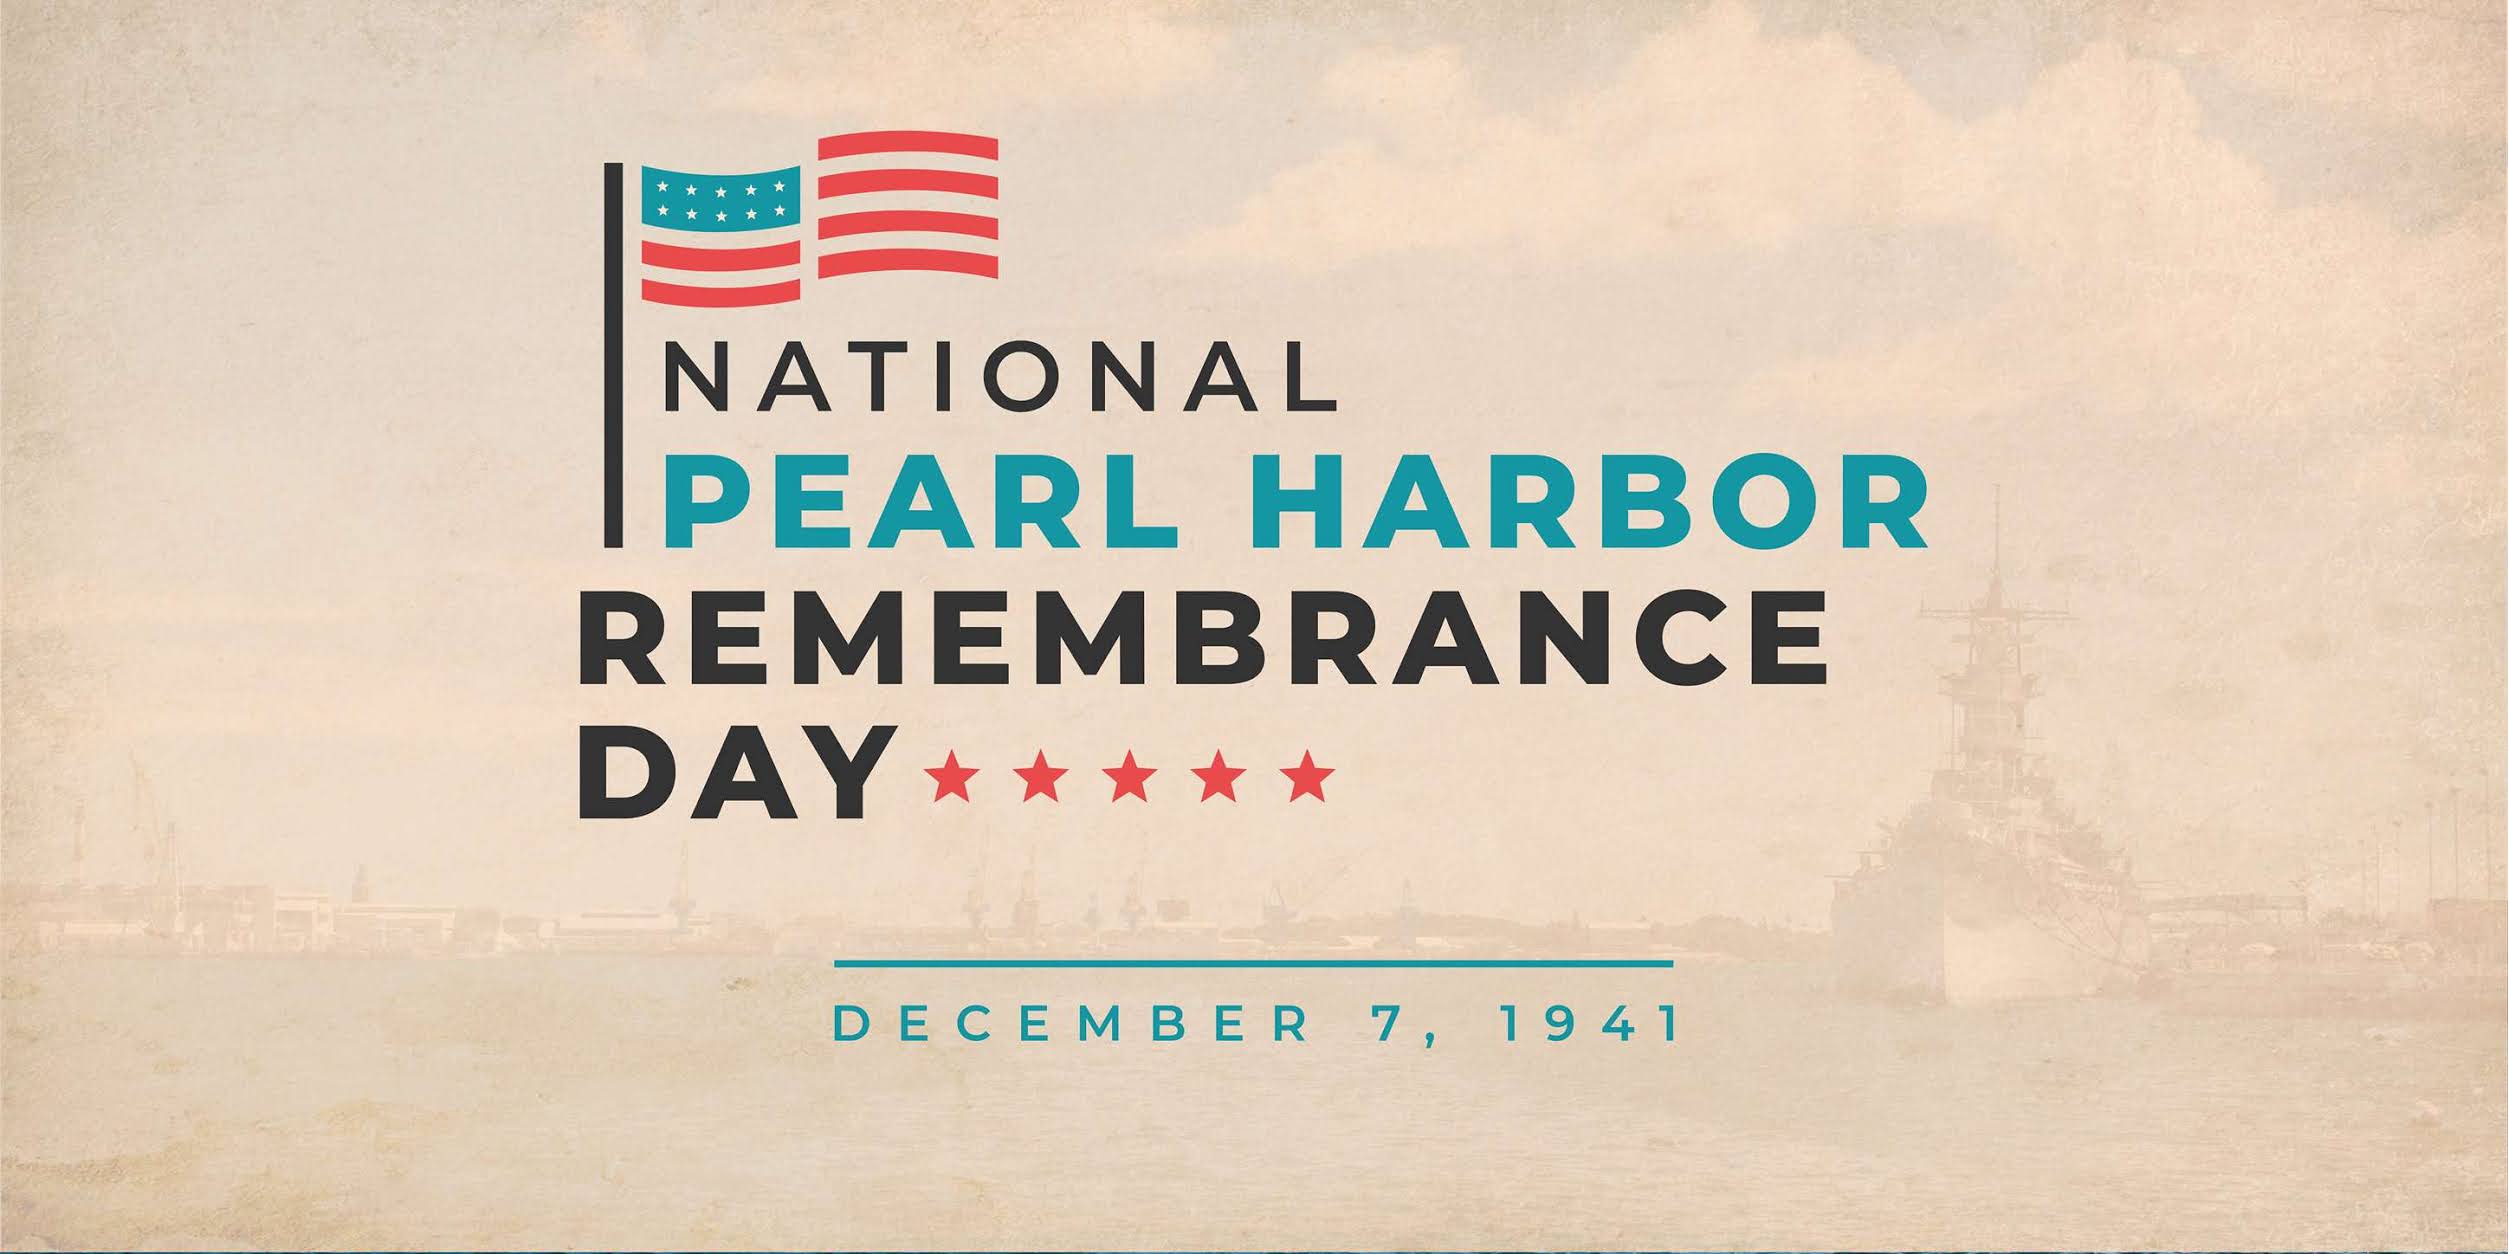 National Pearl Harbor Day of Remembrance Wishes for Instagram